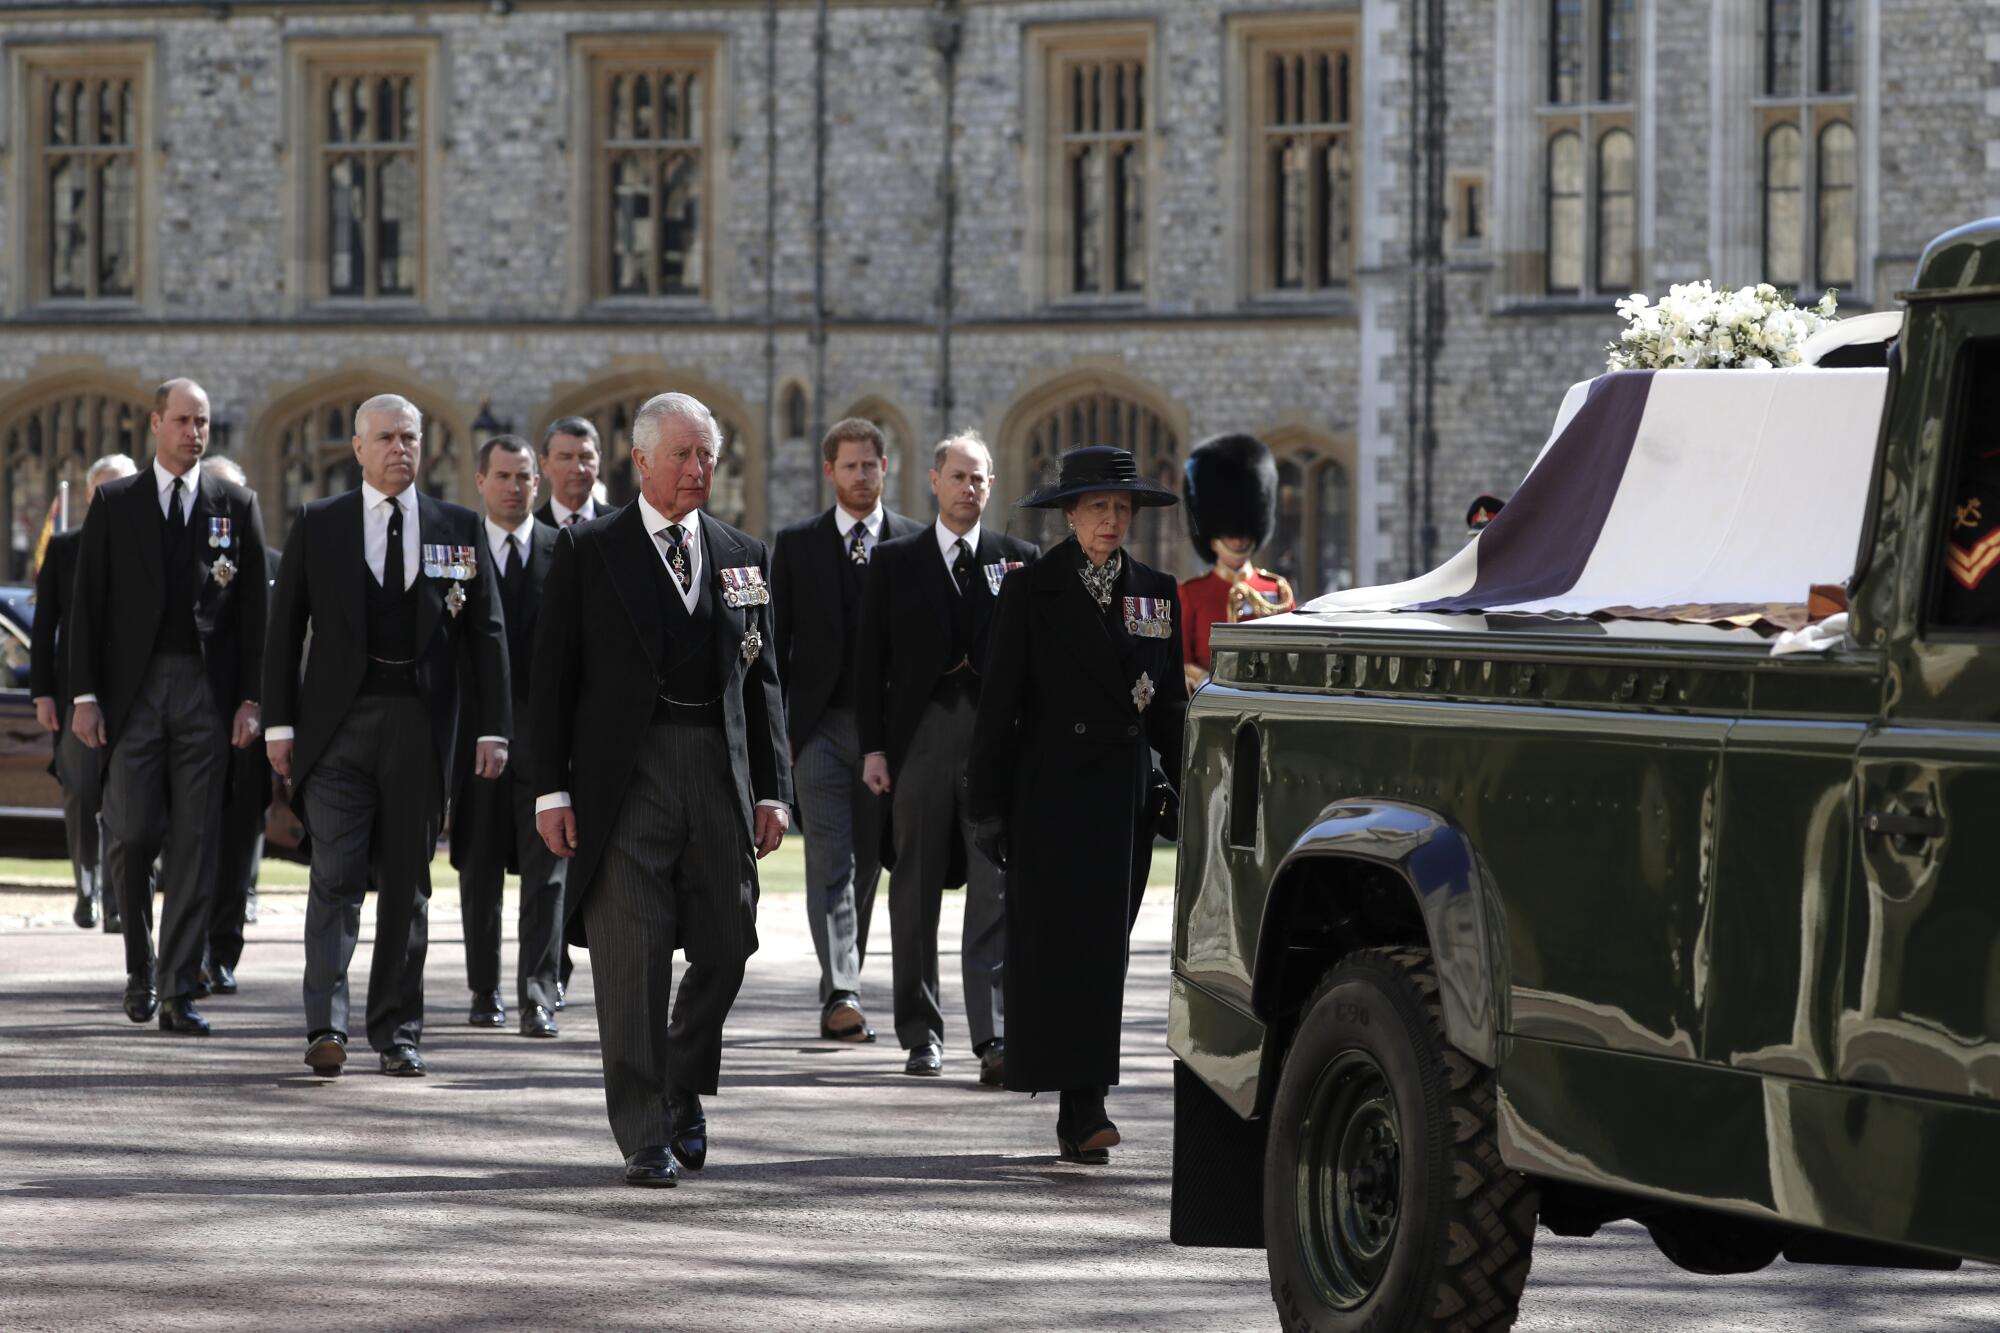 Members of the royal family walk behind Prince Philip's coffin resting in a modified Land Rover in a procession.